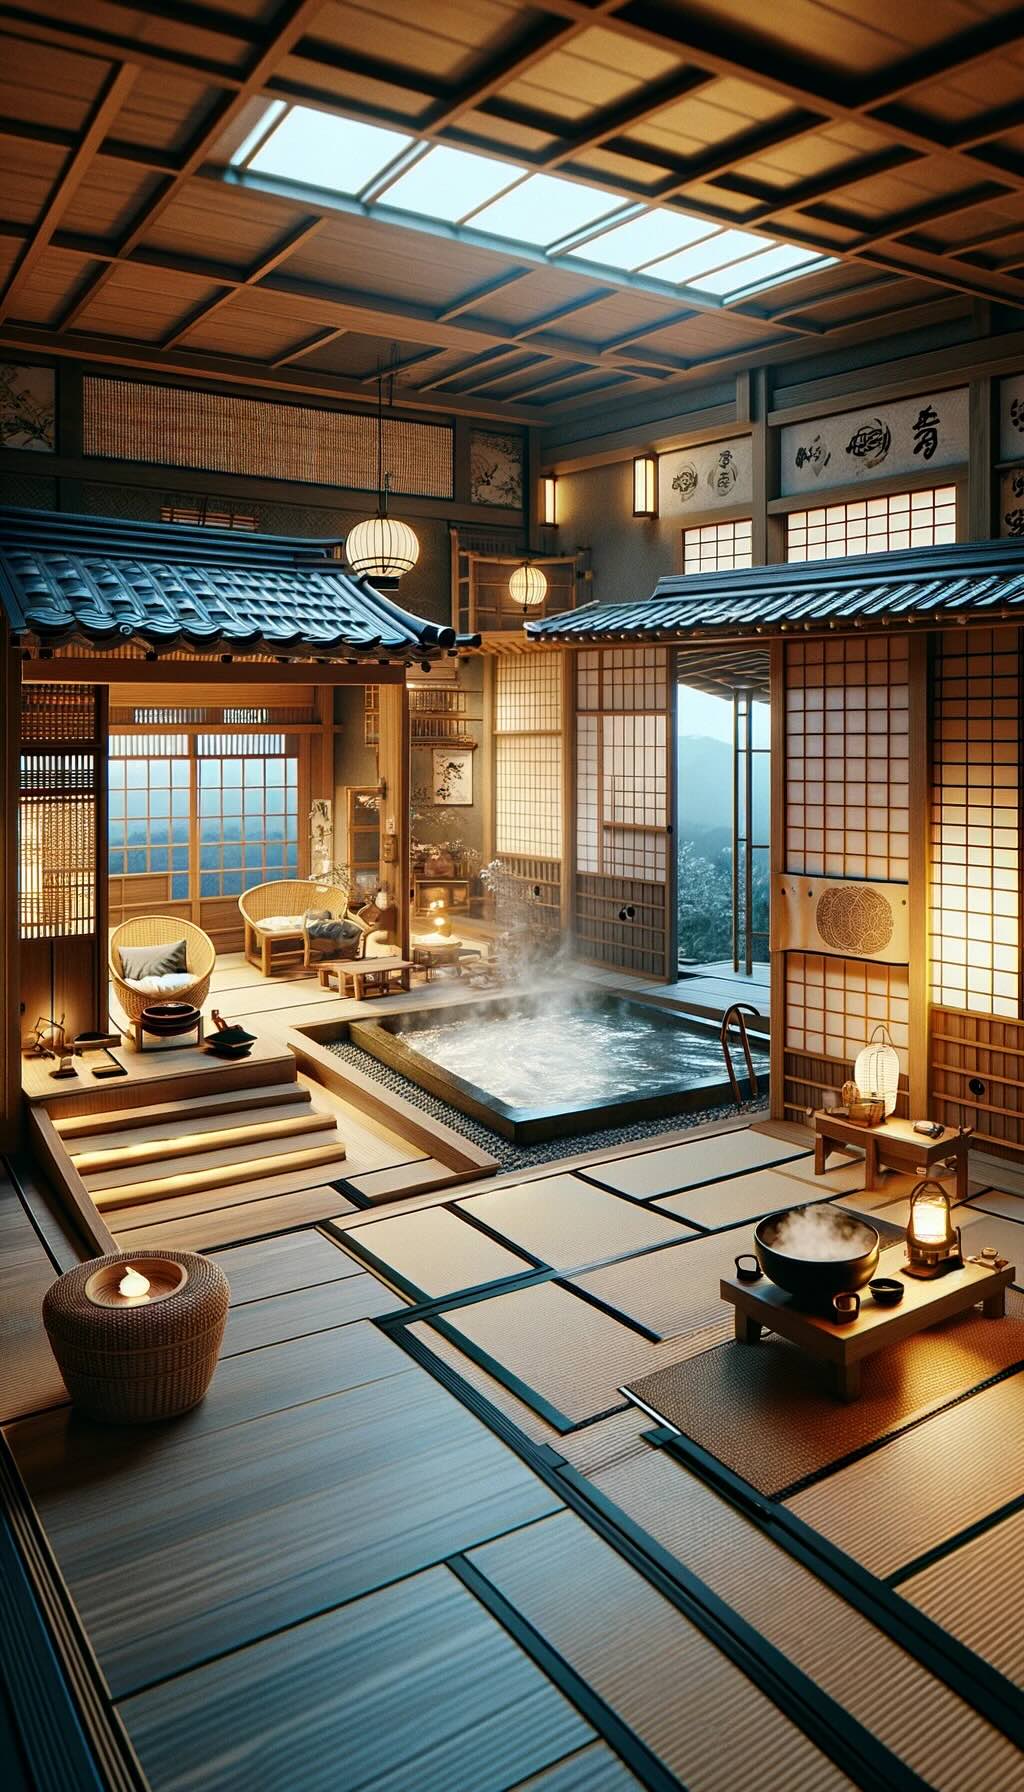 Traditional Japanese ryokan, showcasing the complete onsen experience - digital art 